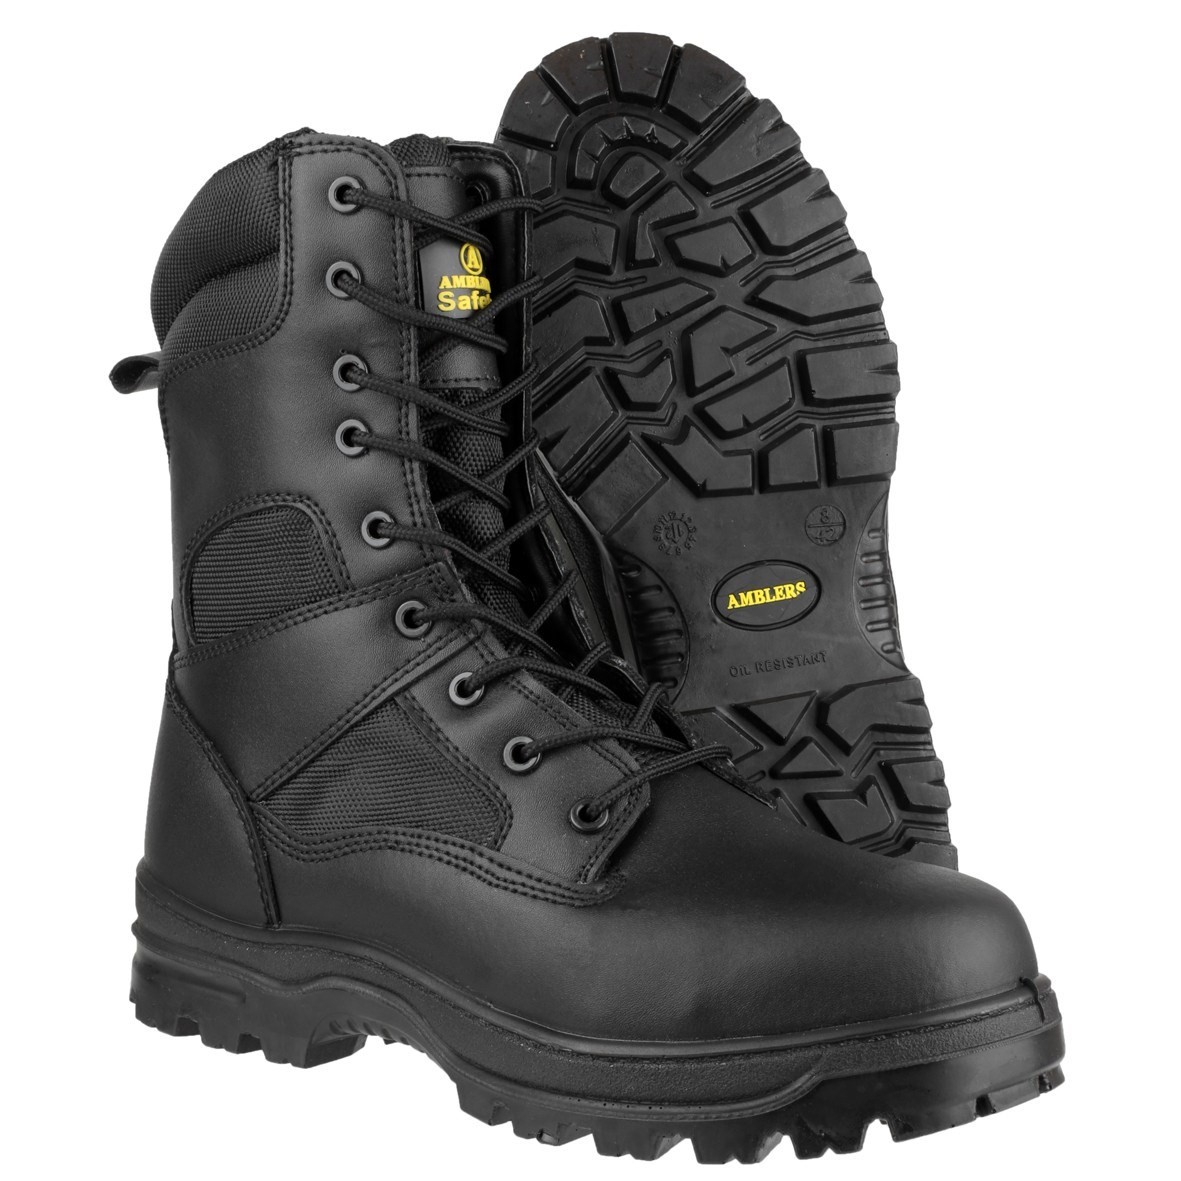 FS009C Water Resistant Hi-leg Lace up Safety Boot - First Safety